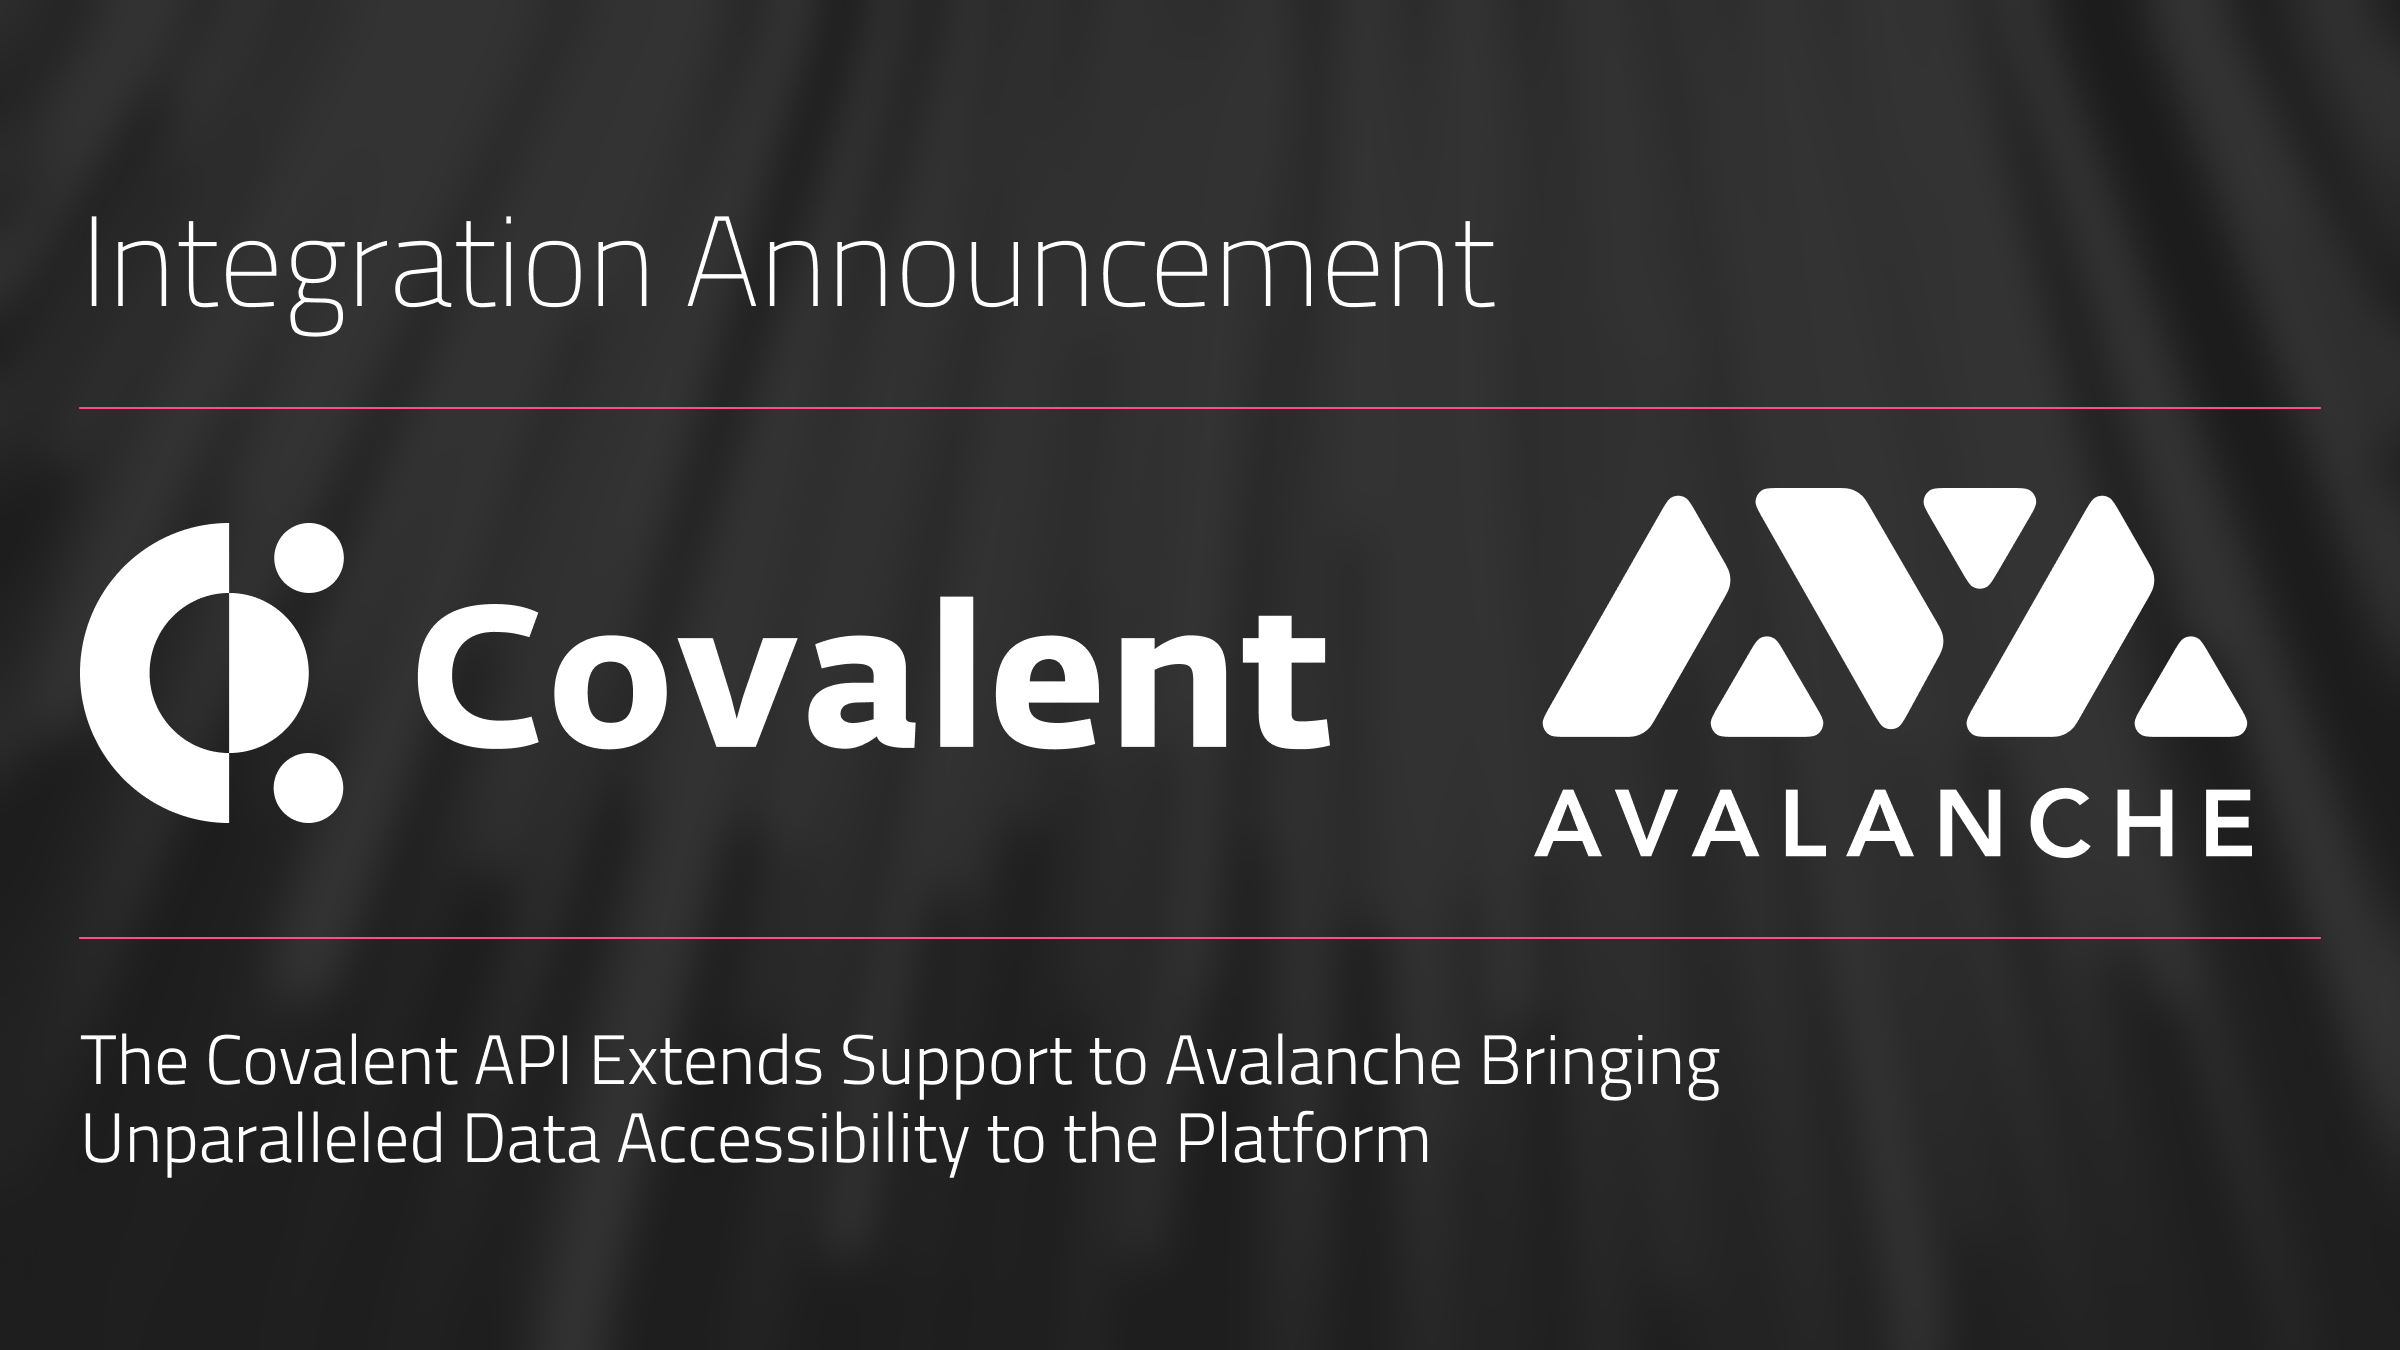 The Covalent API Extends Support to Avalanche Bringing Unparalleled Data Accessibility to the Platform